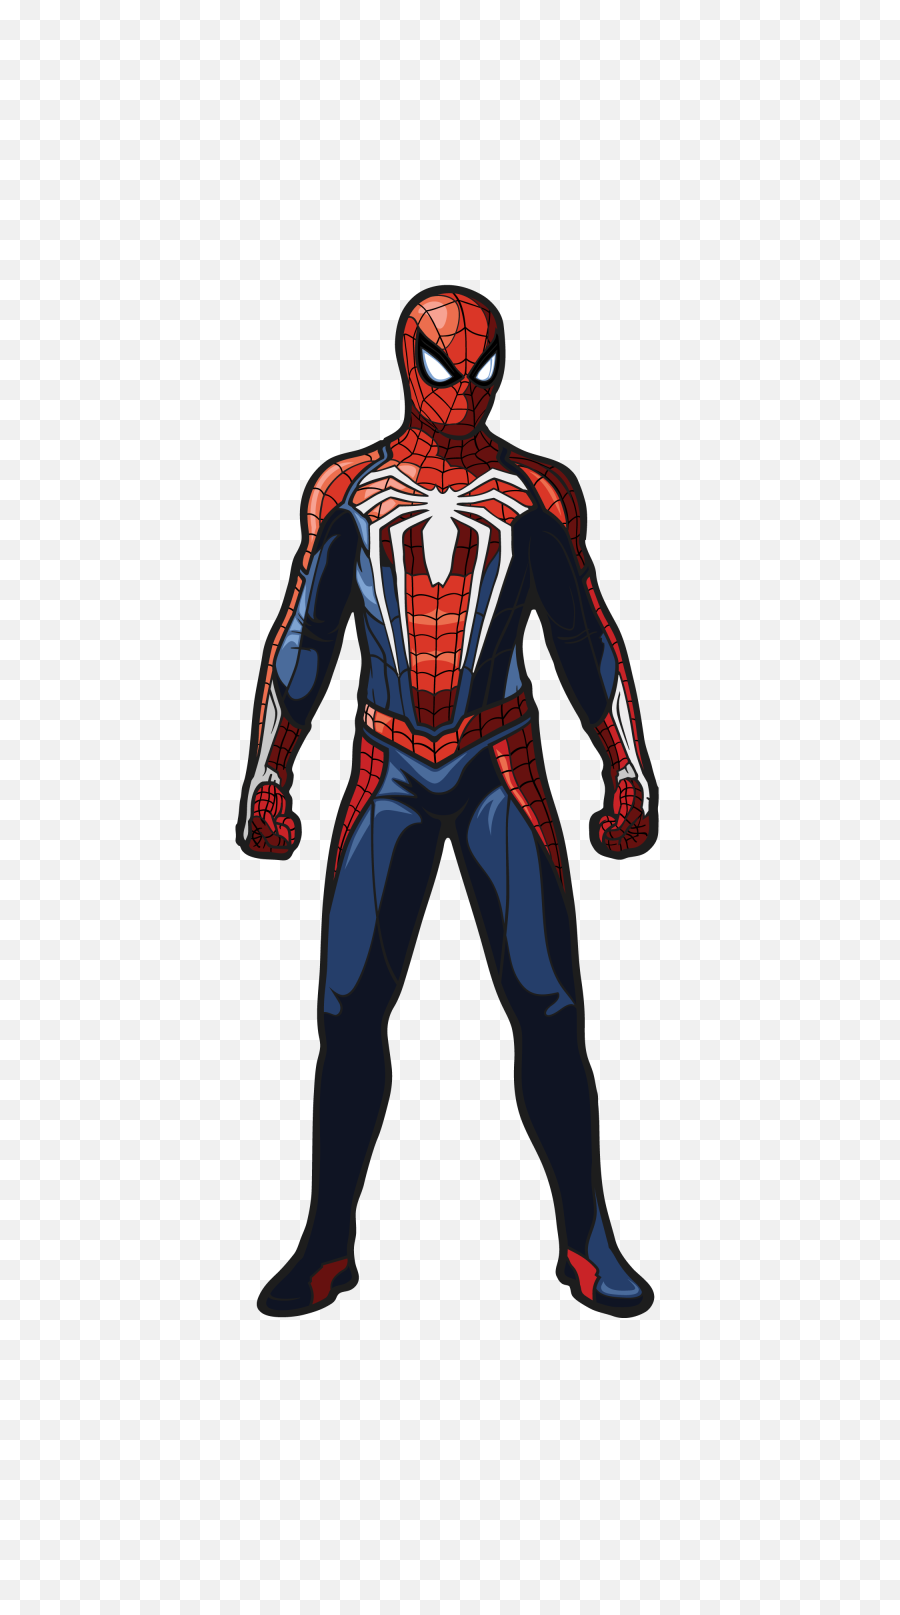 Spiderman Background Png Spiderman Spider Man Ps4 Spider Man Ps4 Png Spiderman Transparent Free Transparent Png Images Pngaaa Com